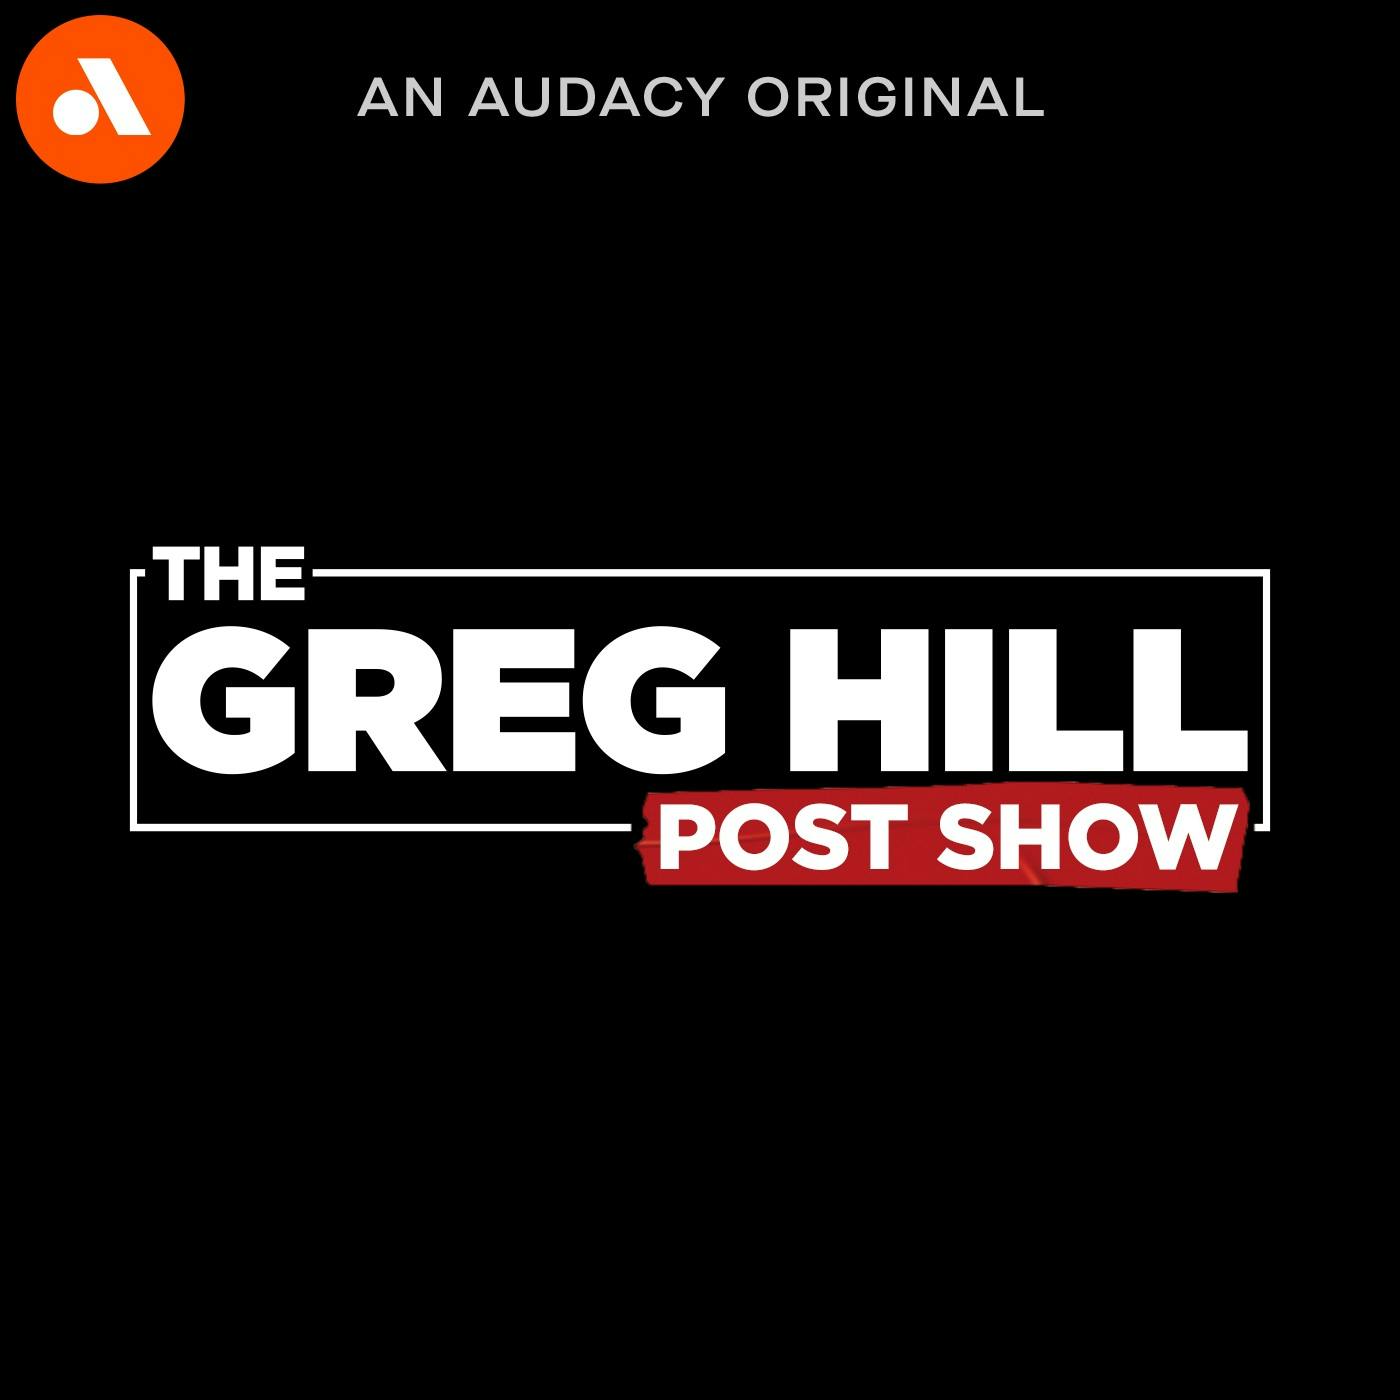 The Greg Hill Post Show